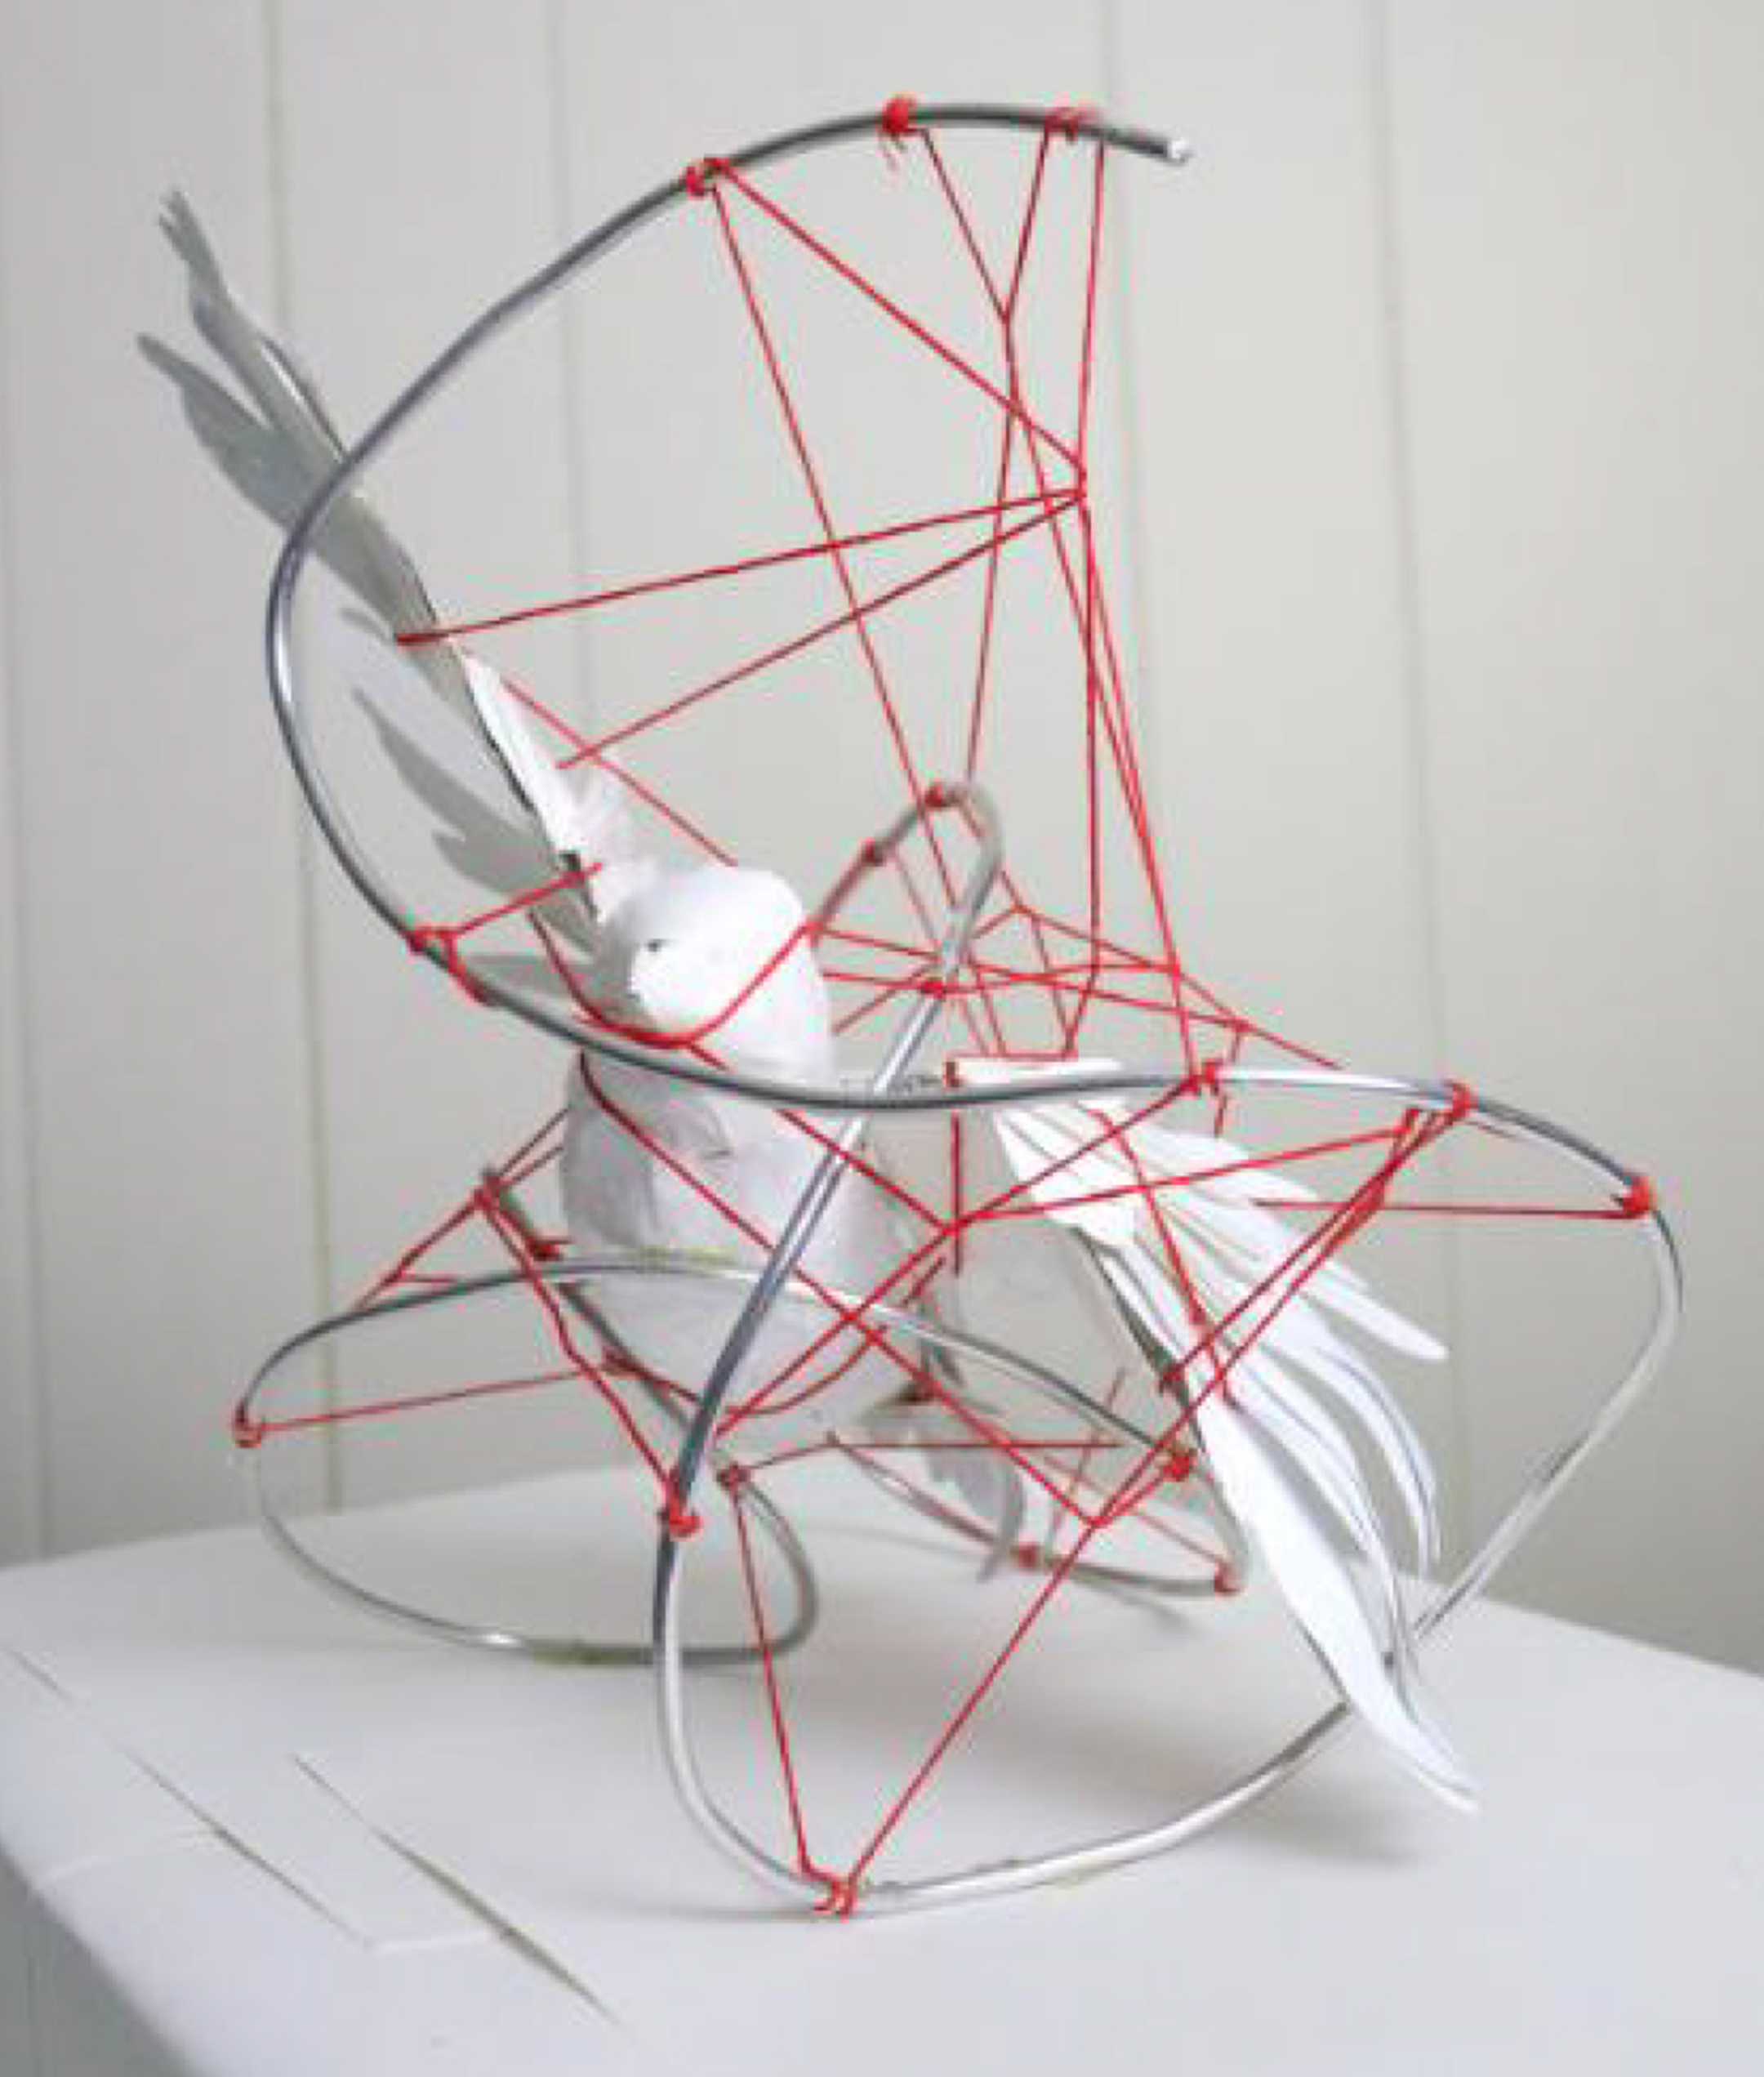 Sculpture of a white bird snared in a tangle of red string